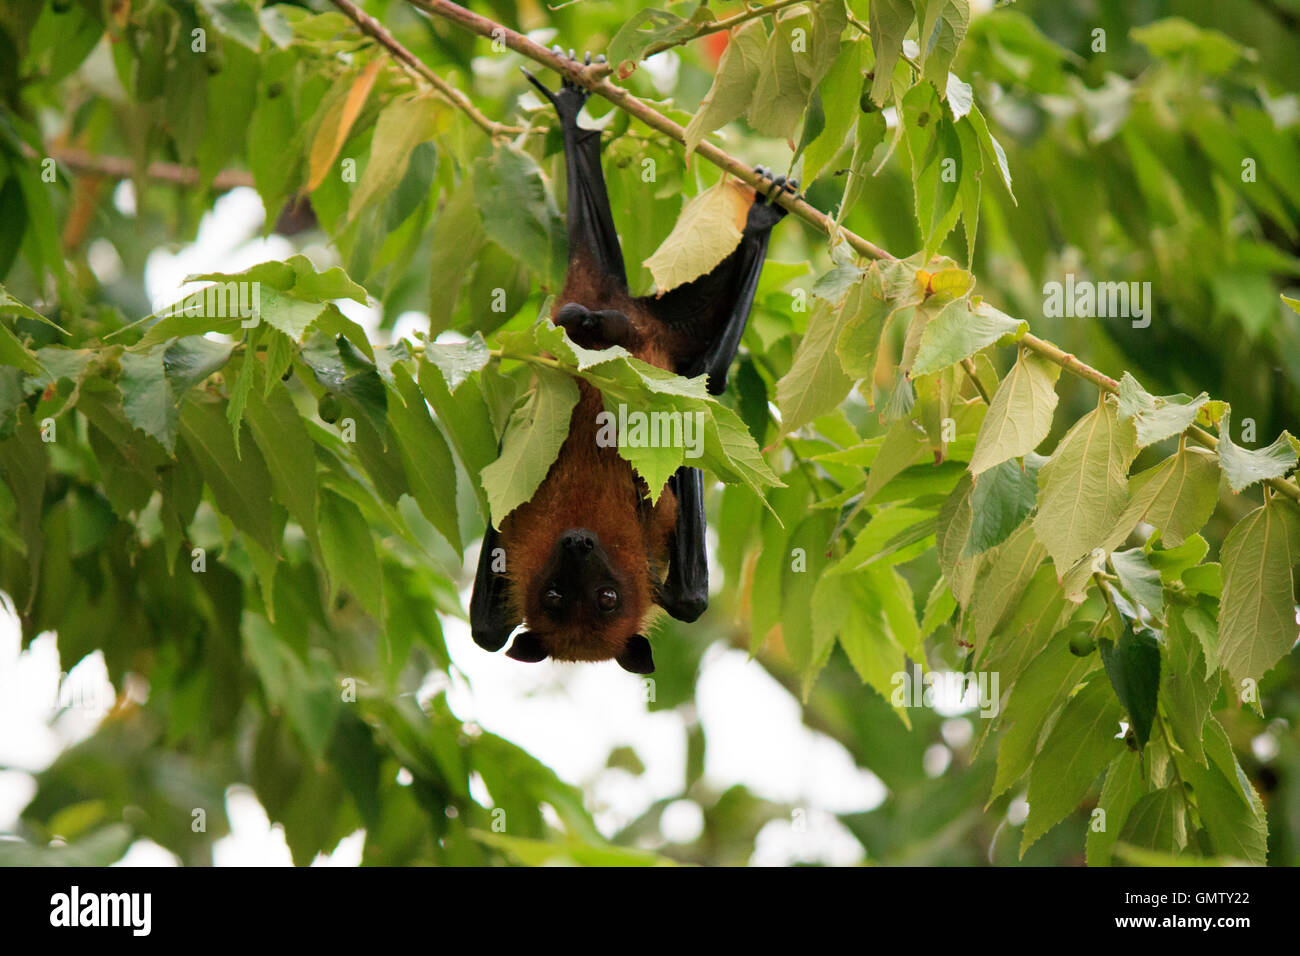 Maldivian fruit bat, also known as flying fox on an island in Maldives Stock Photo